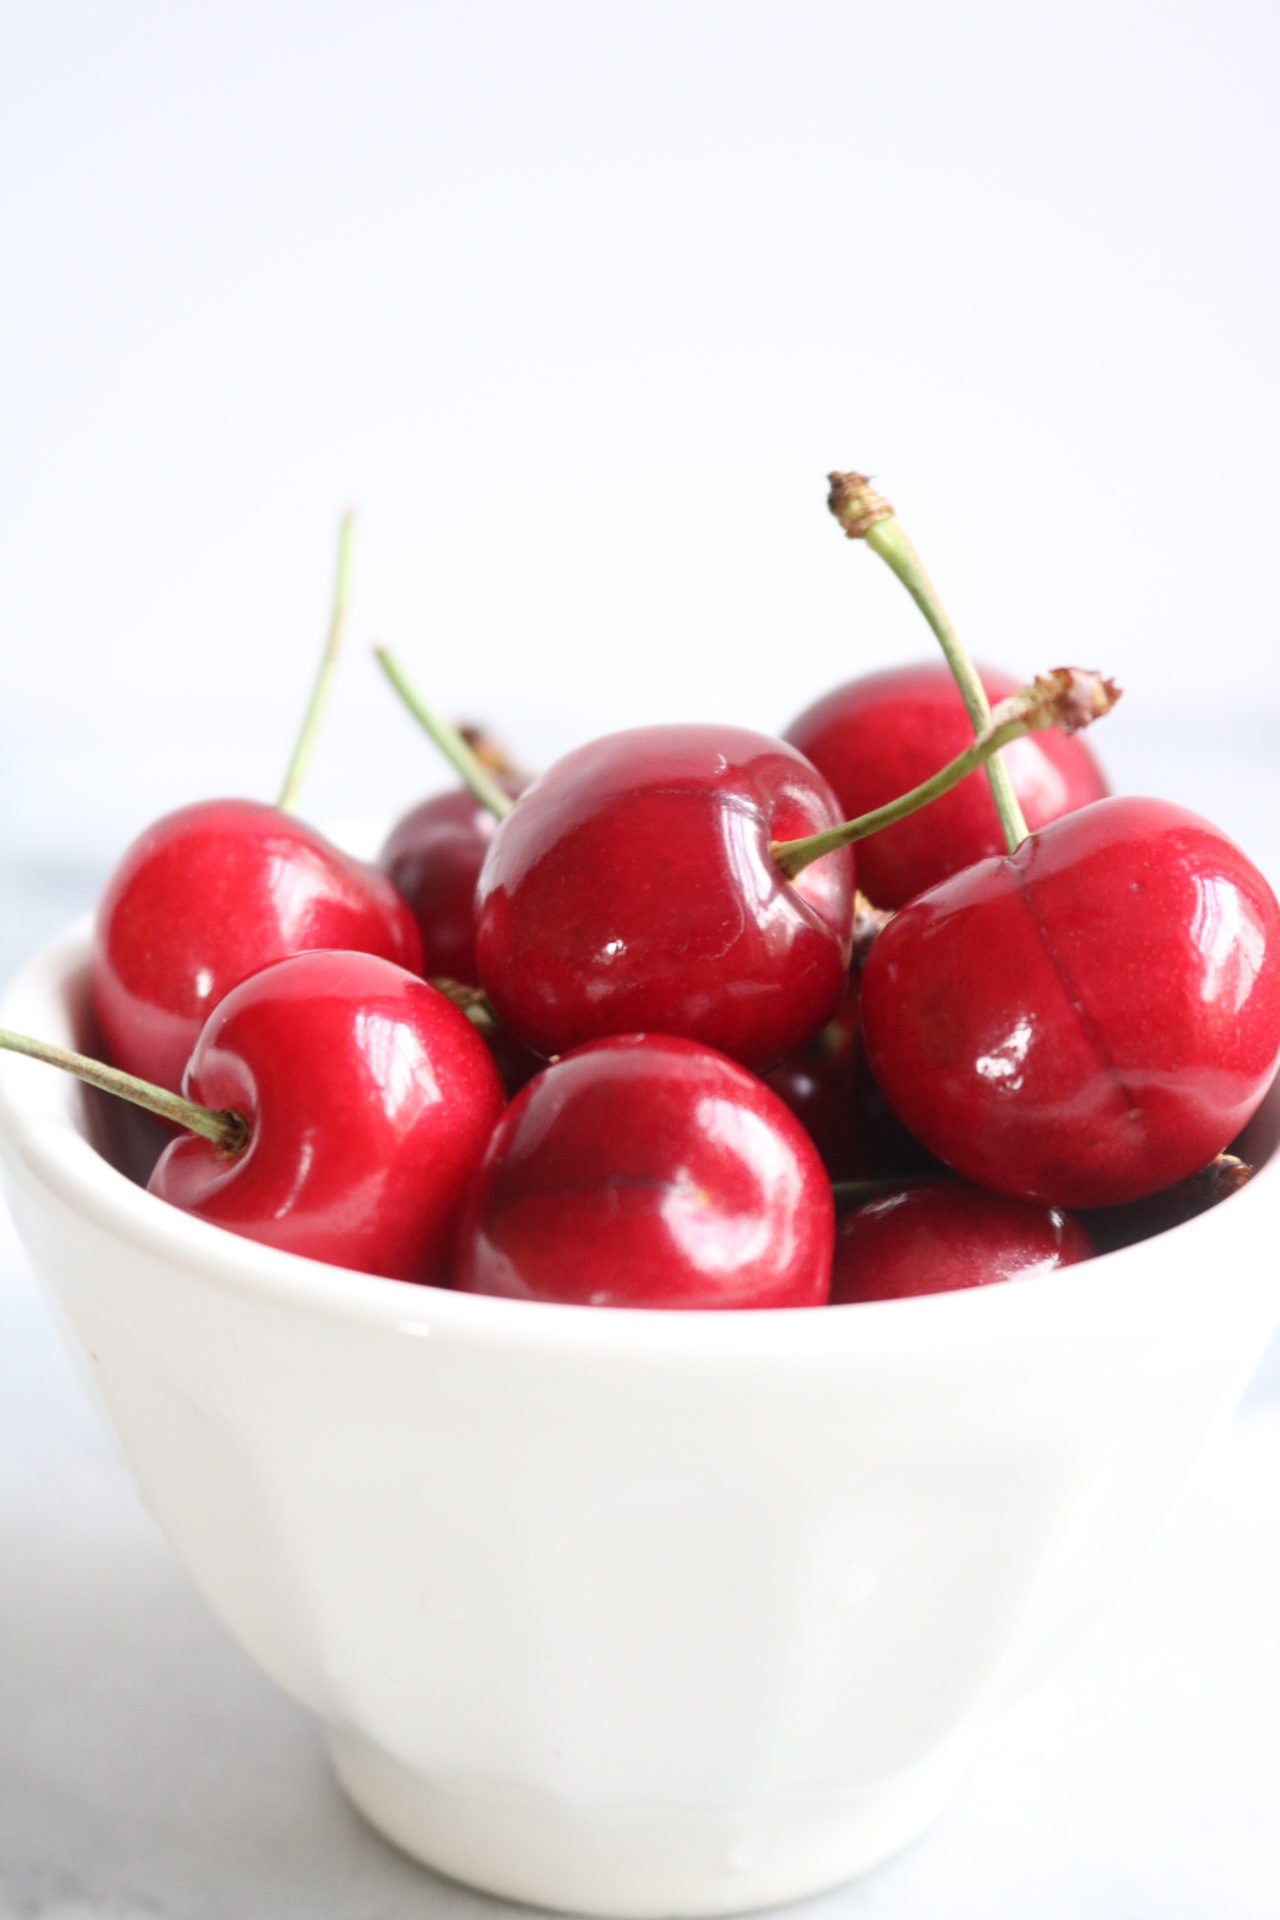 A bowl of cherries | The Nutrition Adventure 